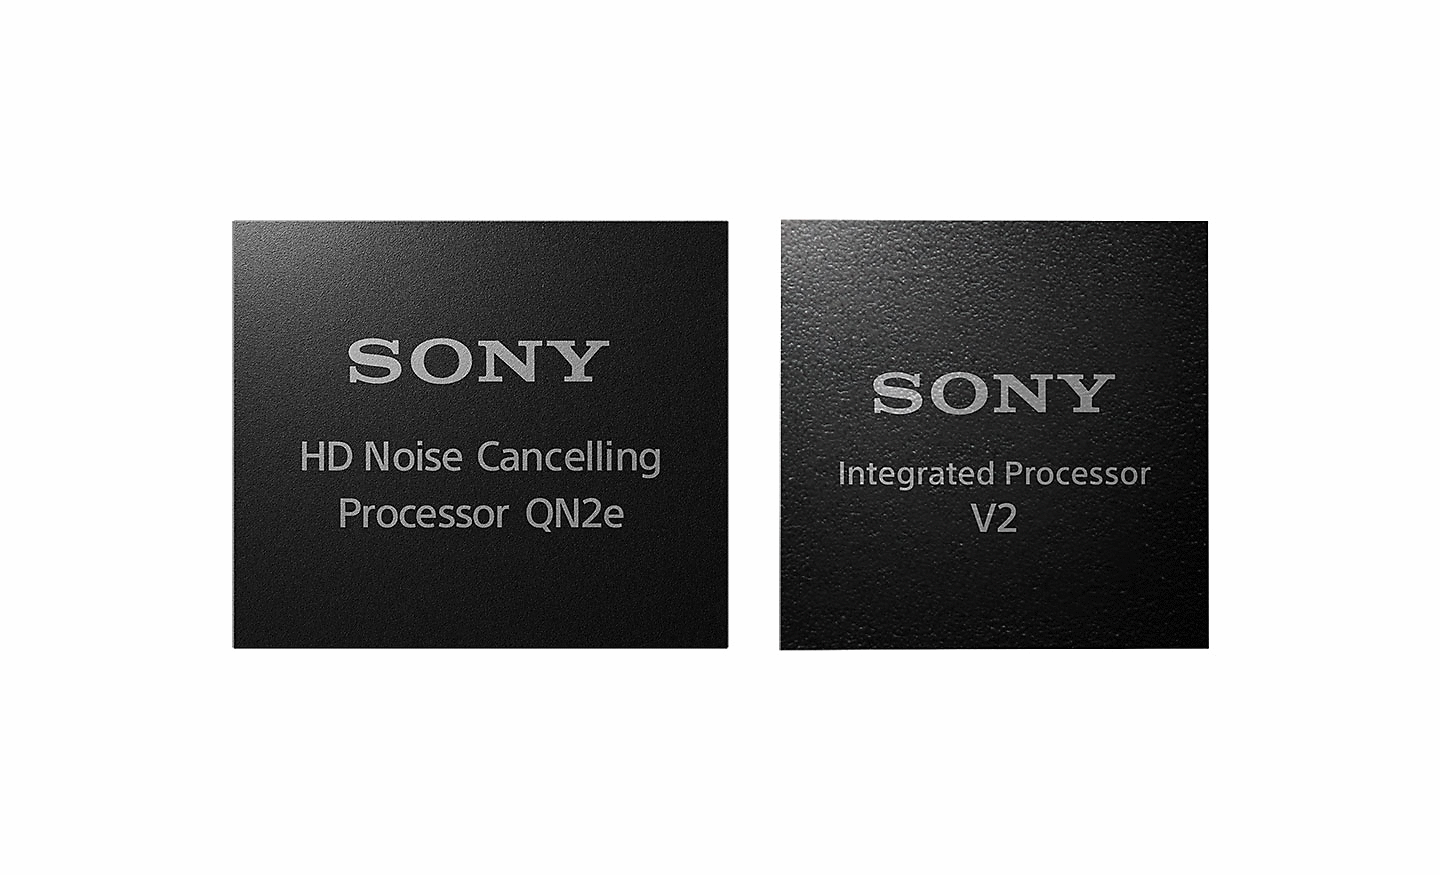 Image of two processors, the left is a HD noise canceling processor and right the integrated processor V2